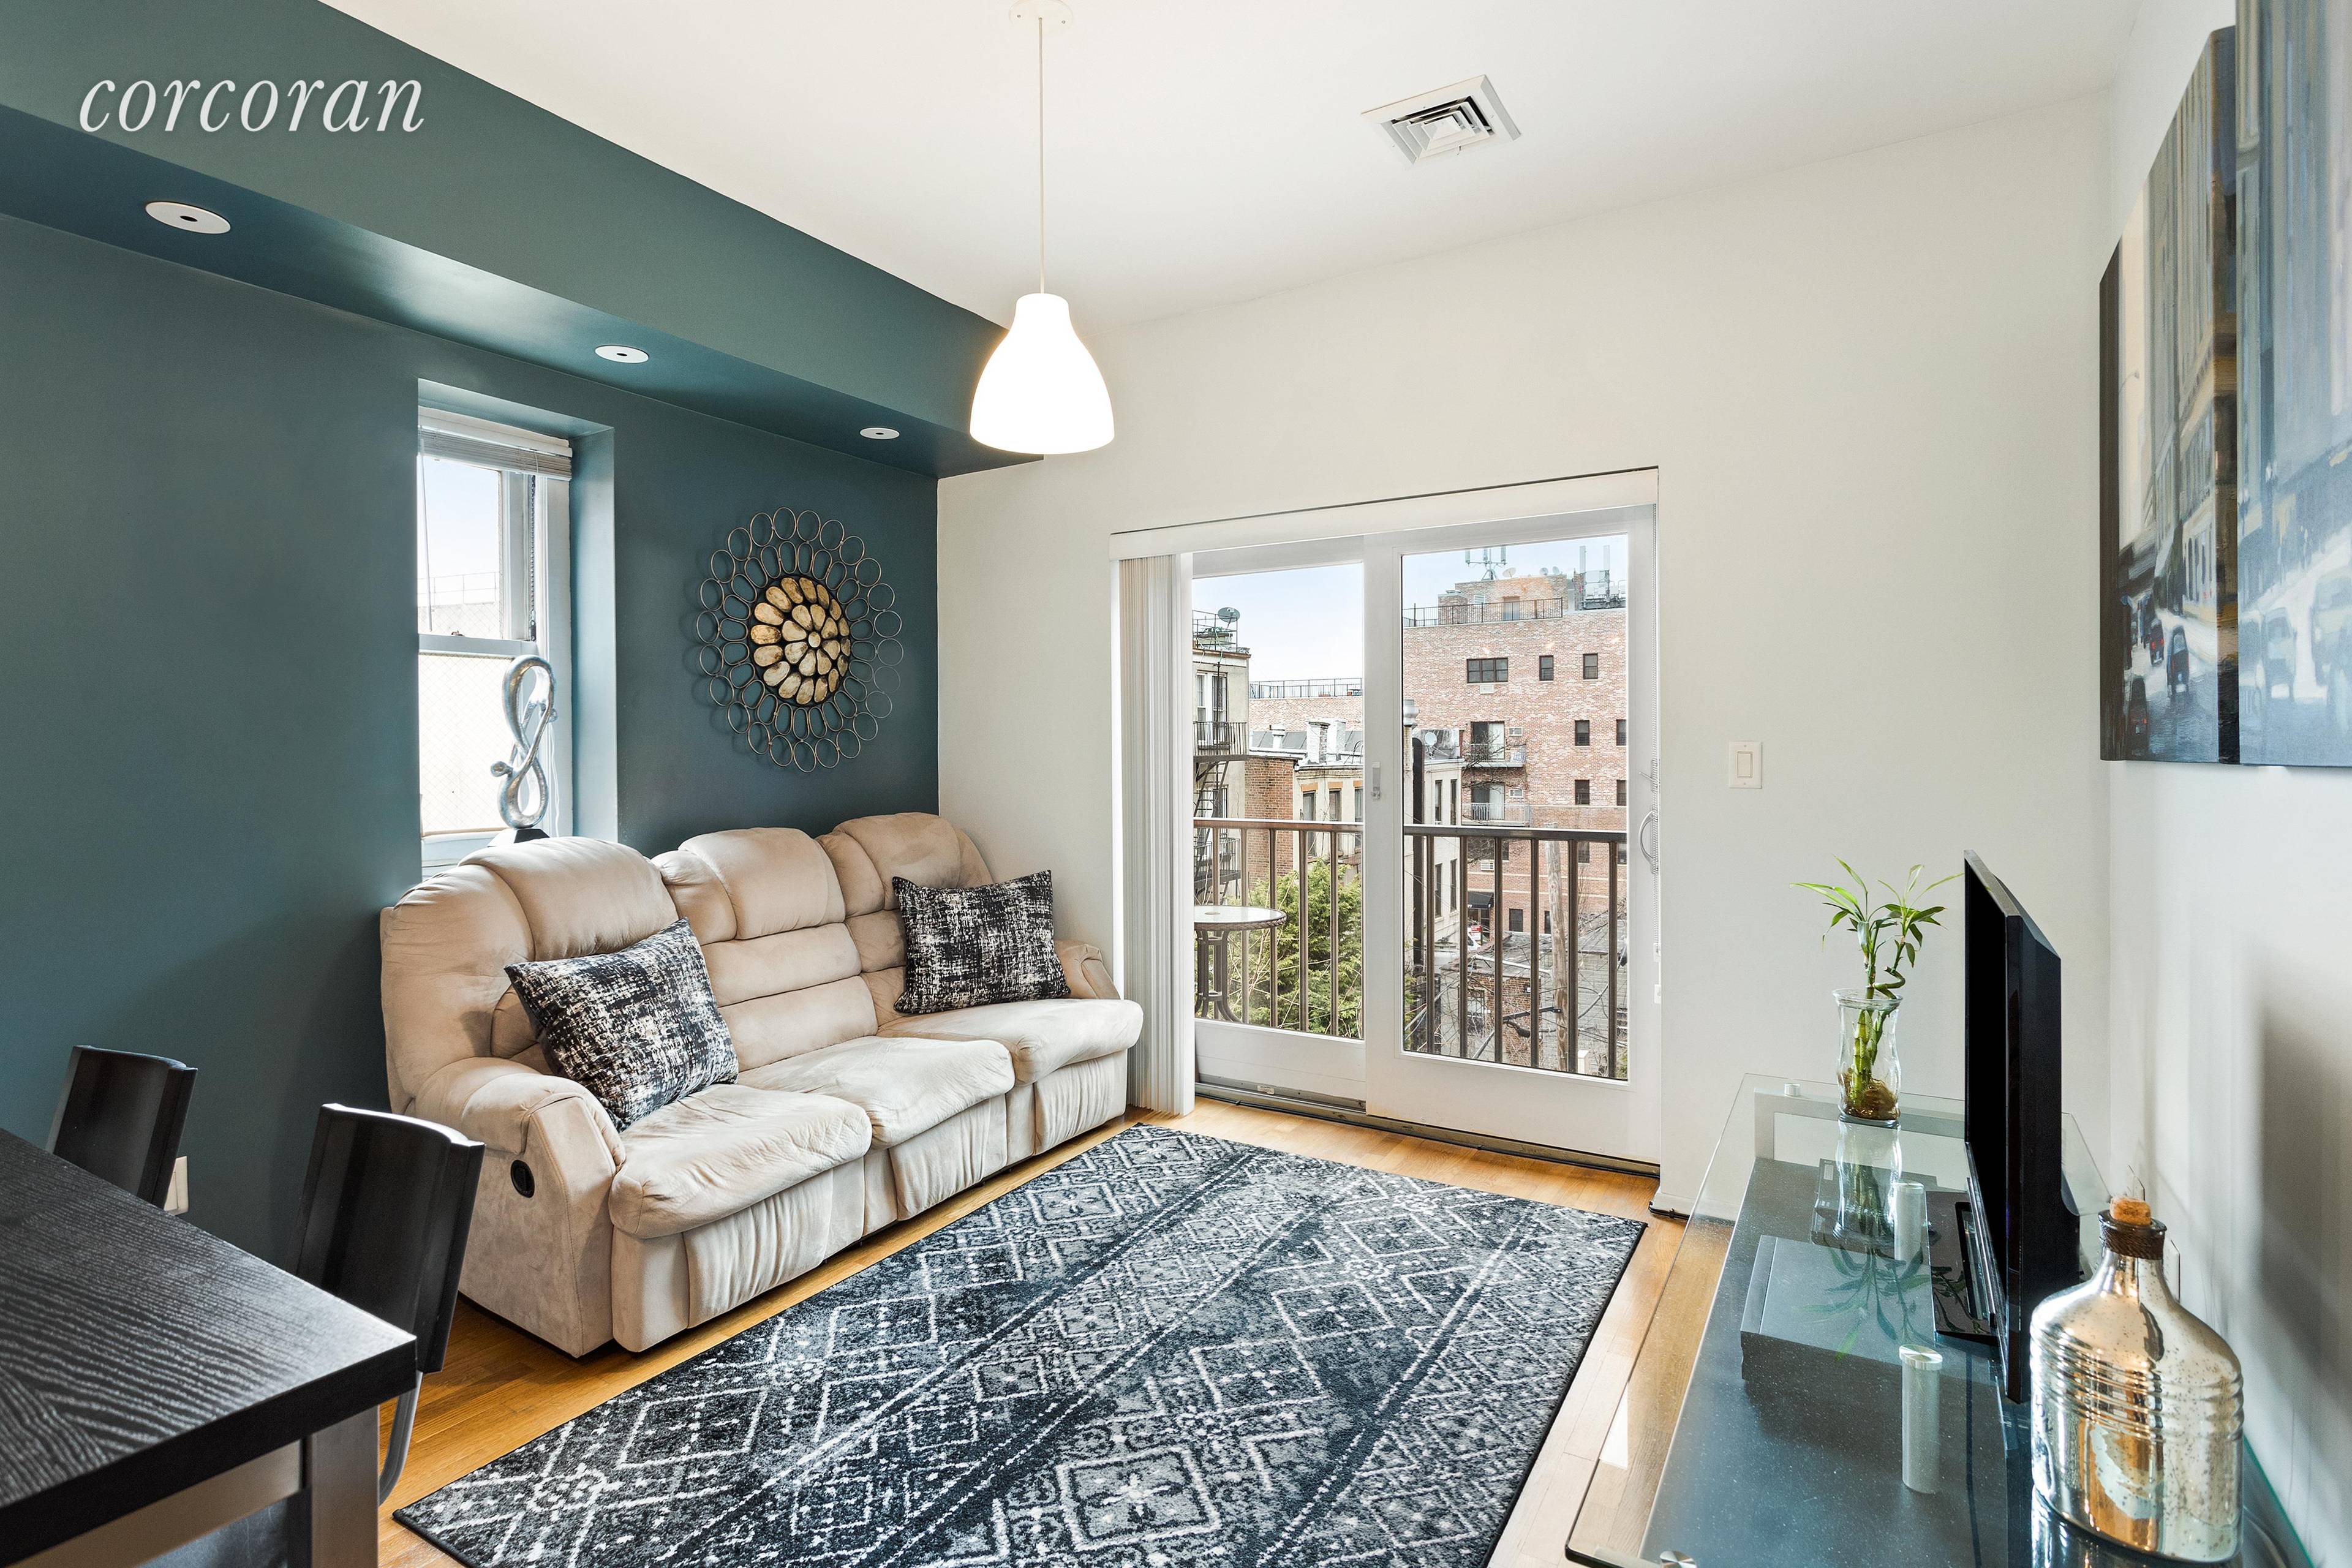 357 15th Street, Unit 3BFantastic opportunity awaits on 15th Street in Park Slope !